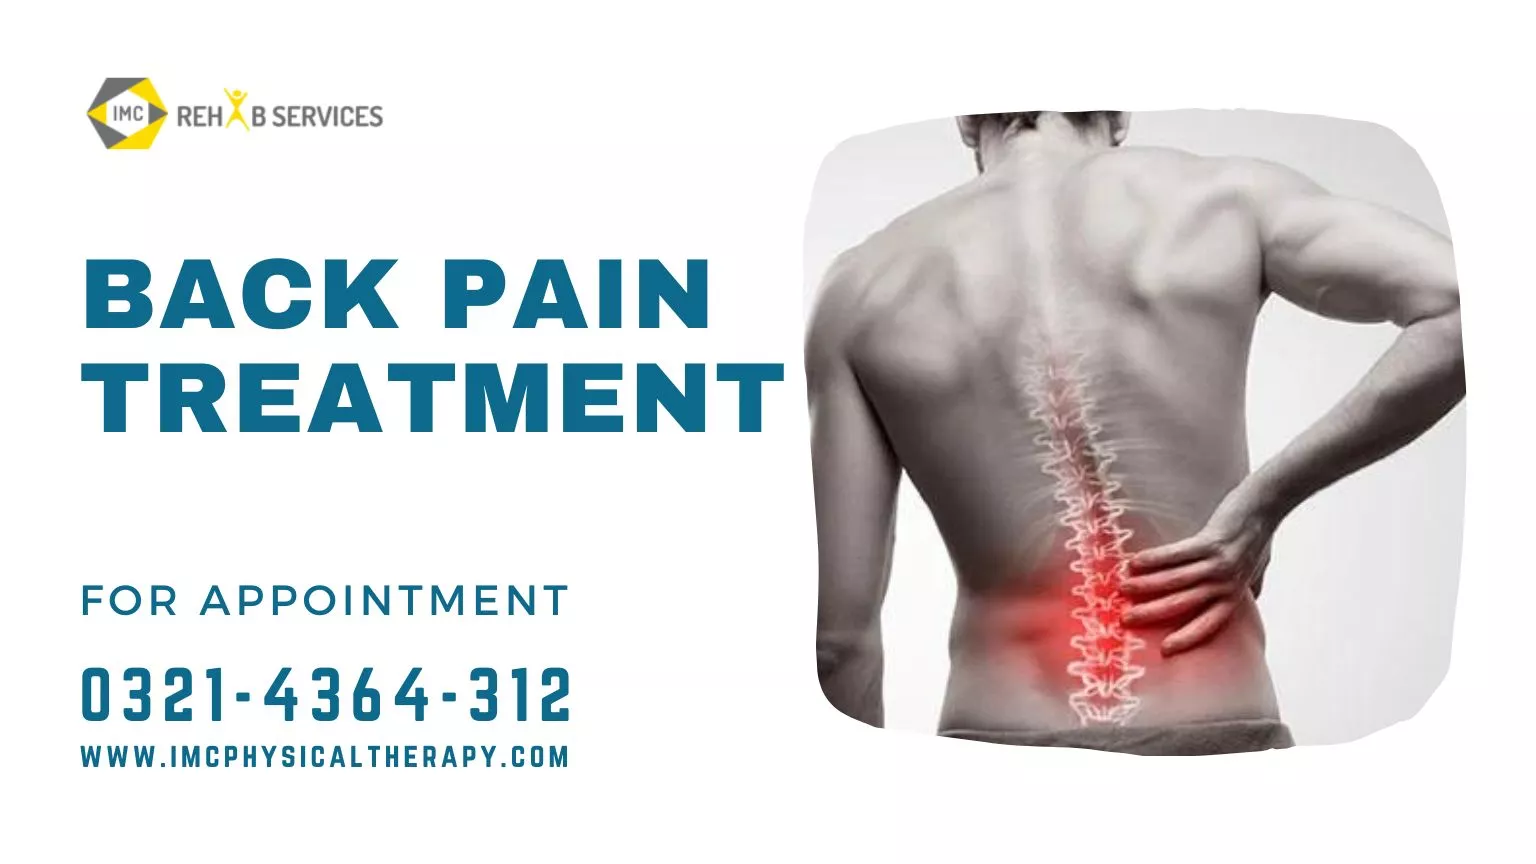 Physiotherapy for Back Pain Relief: What You Need to Know